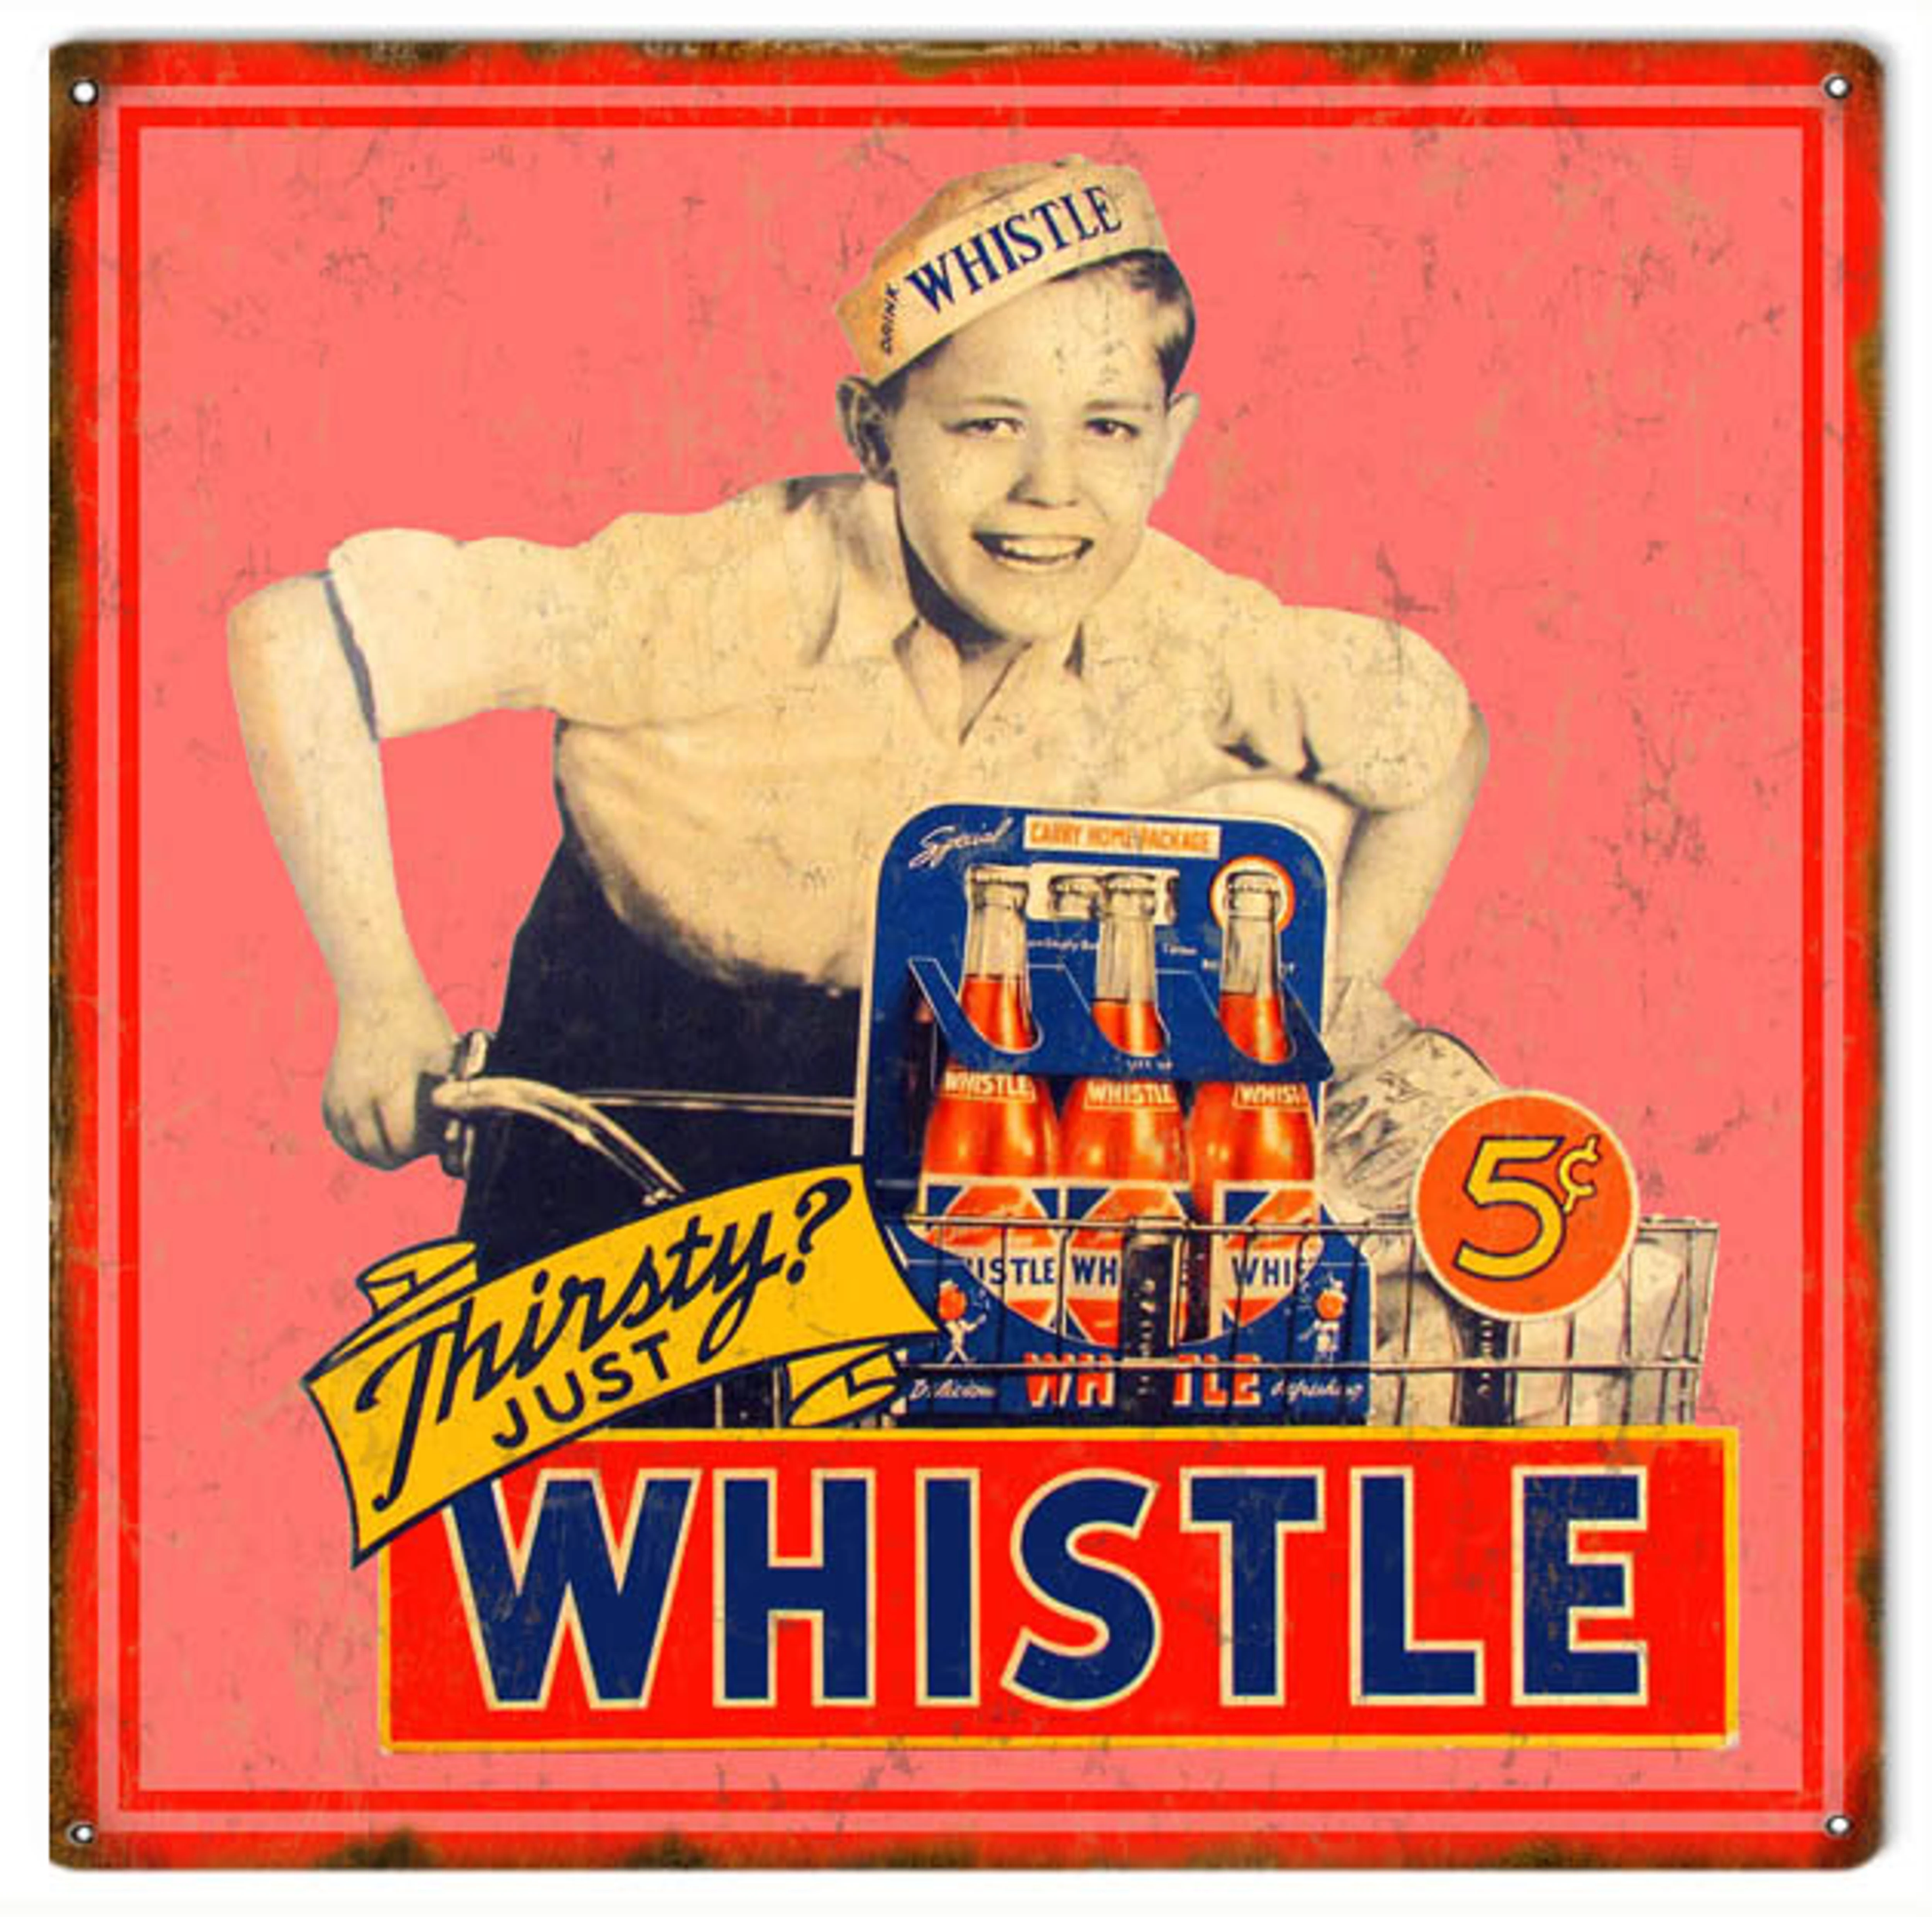 Thirsty Just Whistle Soda Pop Metal Sign 12 x 12 vintage style retro country advertising art wall decor RG